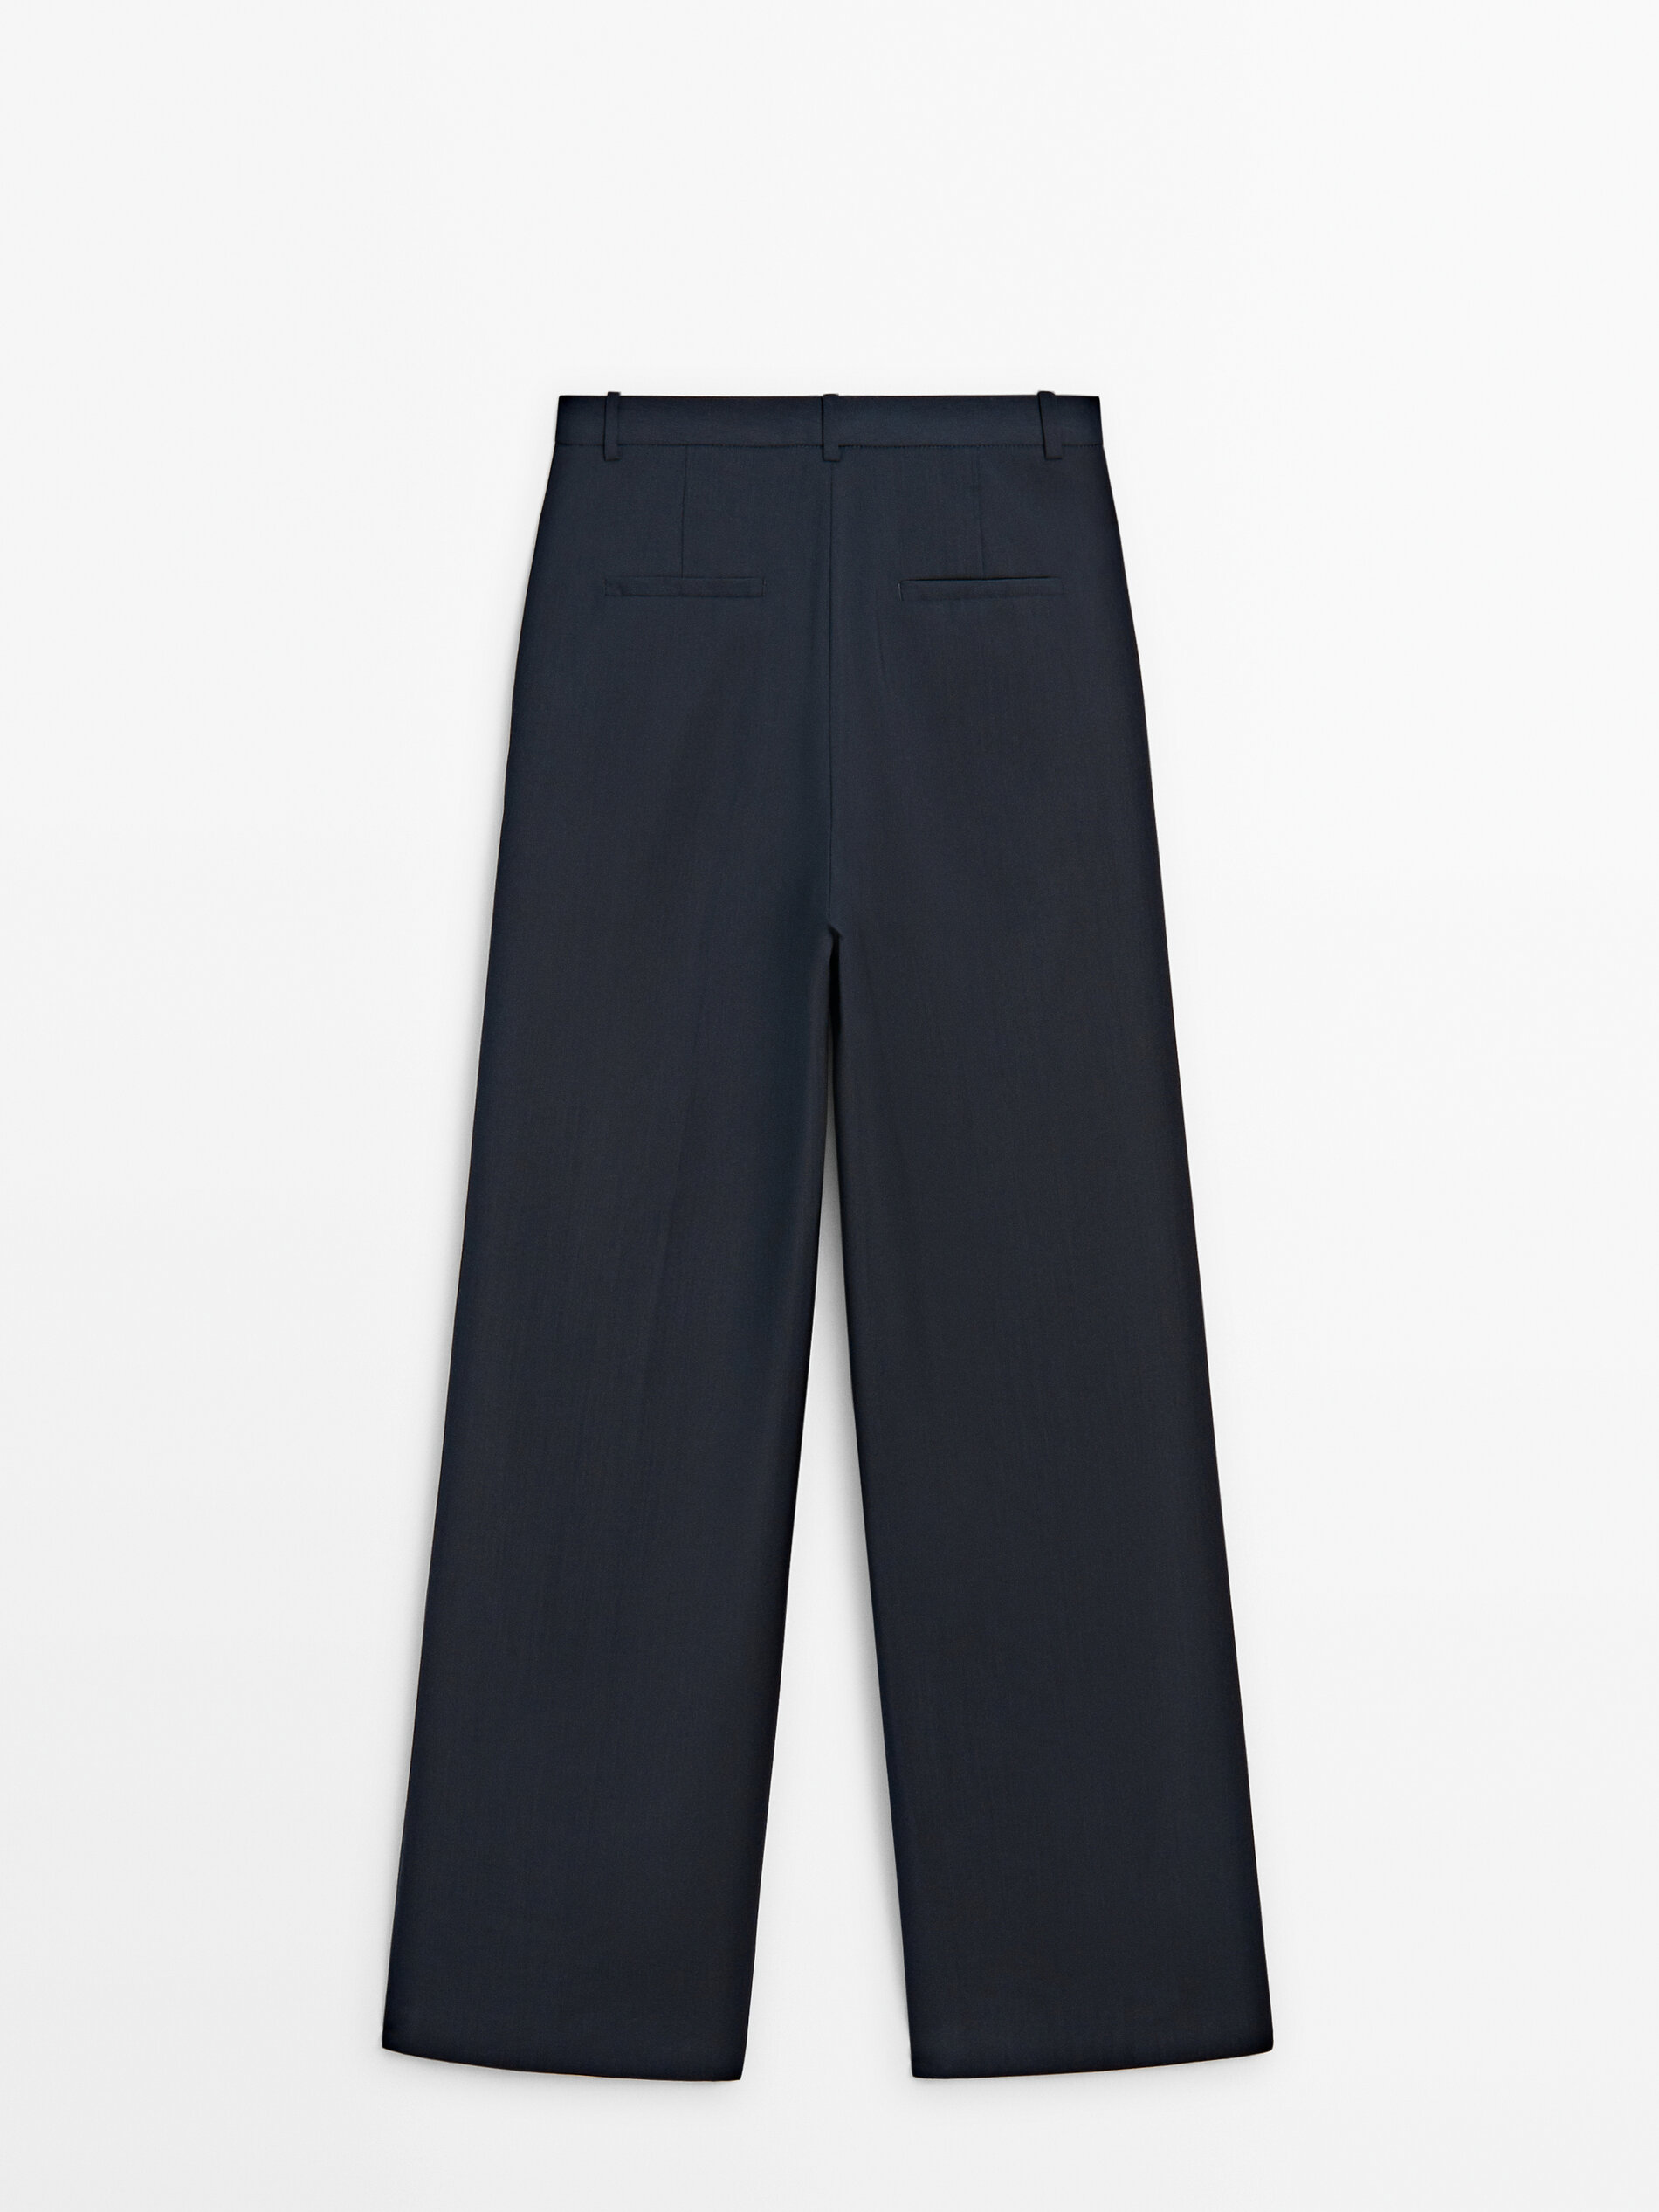 100% cool wool suit trousers · Navy Blue, Black · Dressy | Massimo Dutti